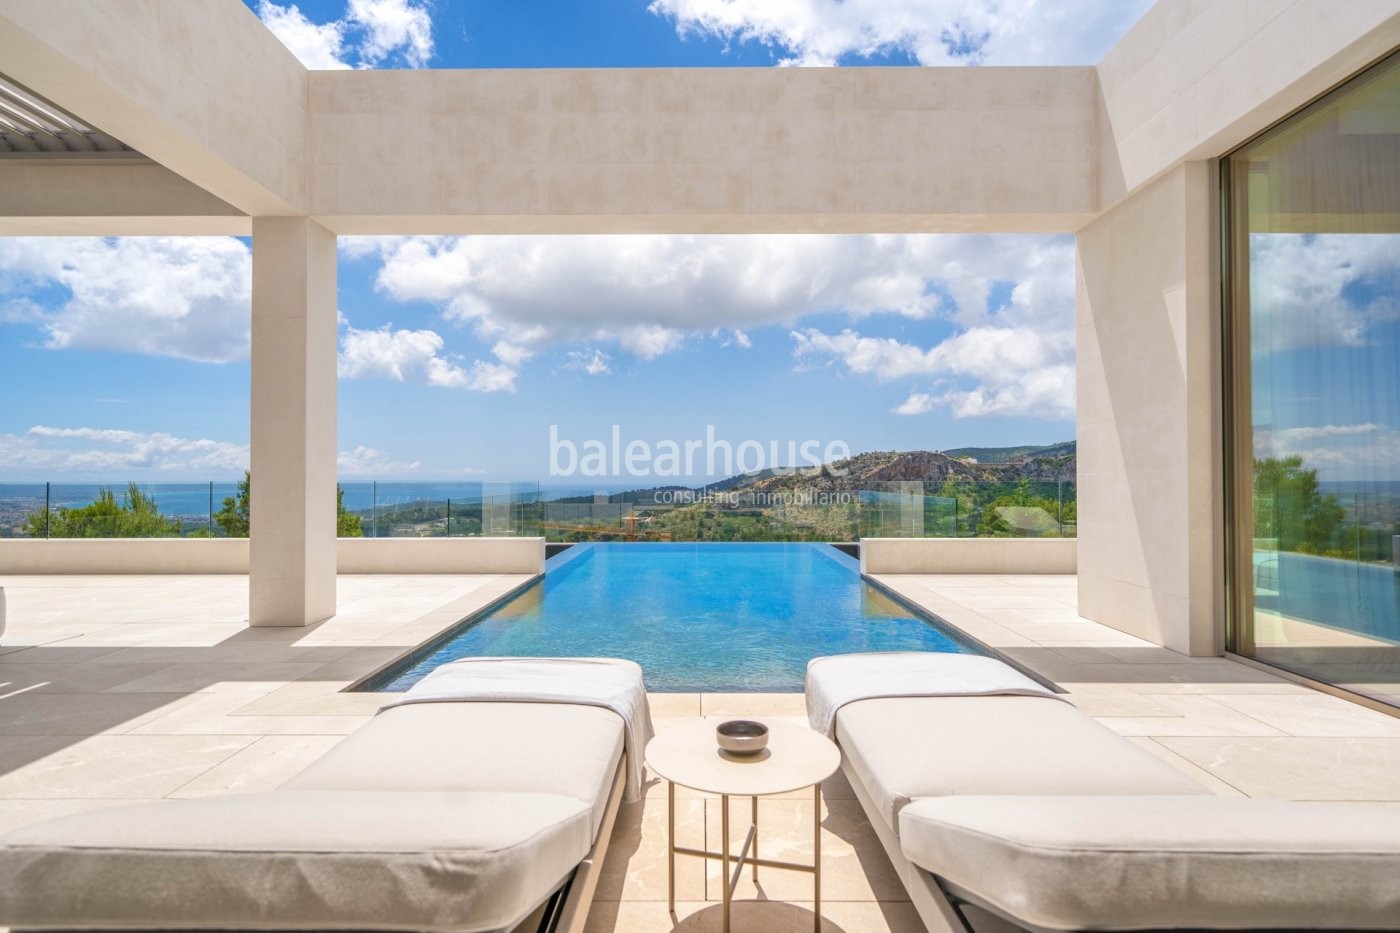 Avant-garde and design with stunning sea views in this newly built villa in Son Vida.